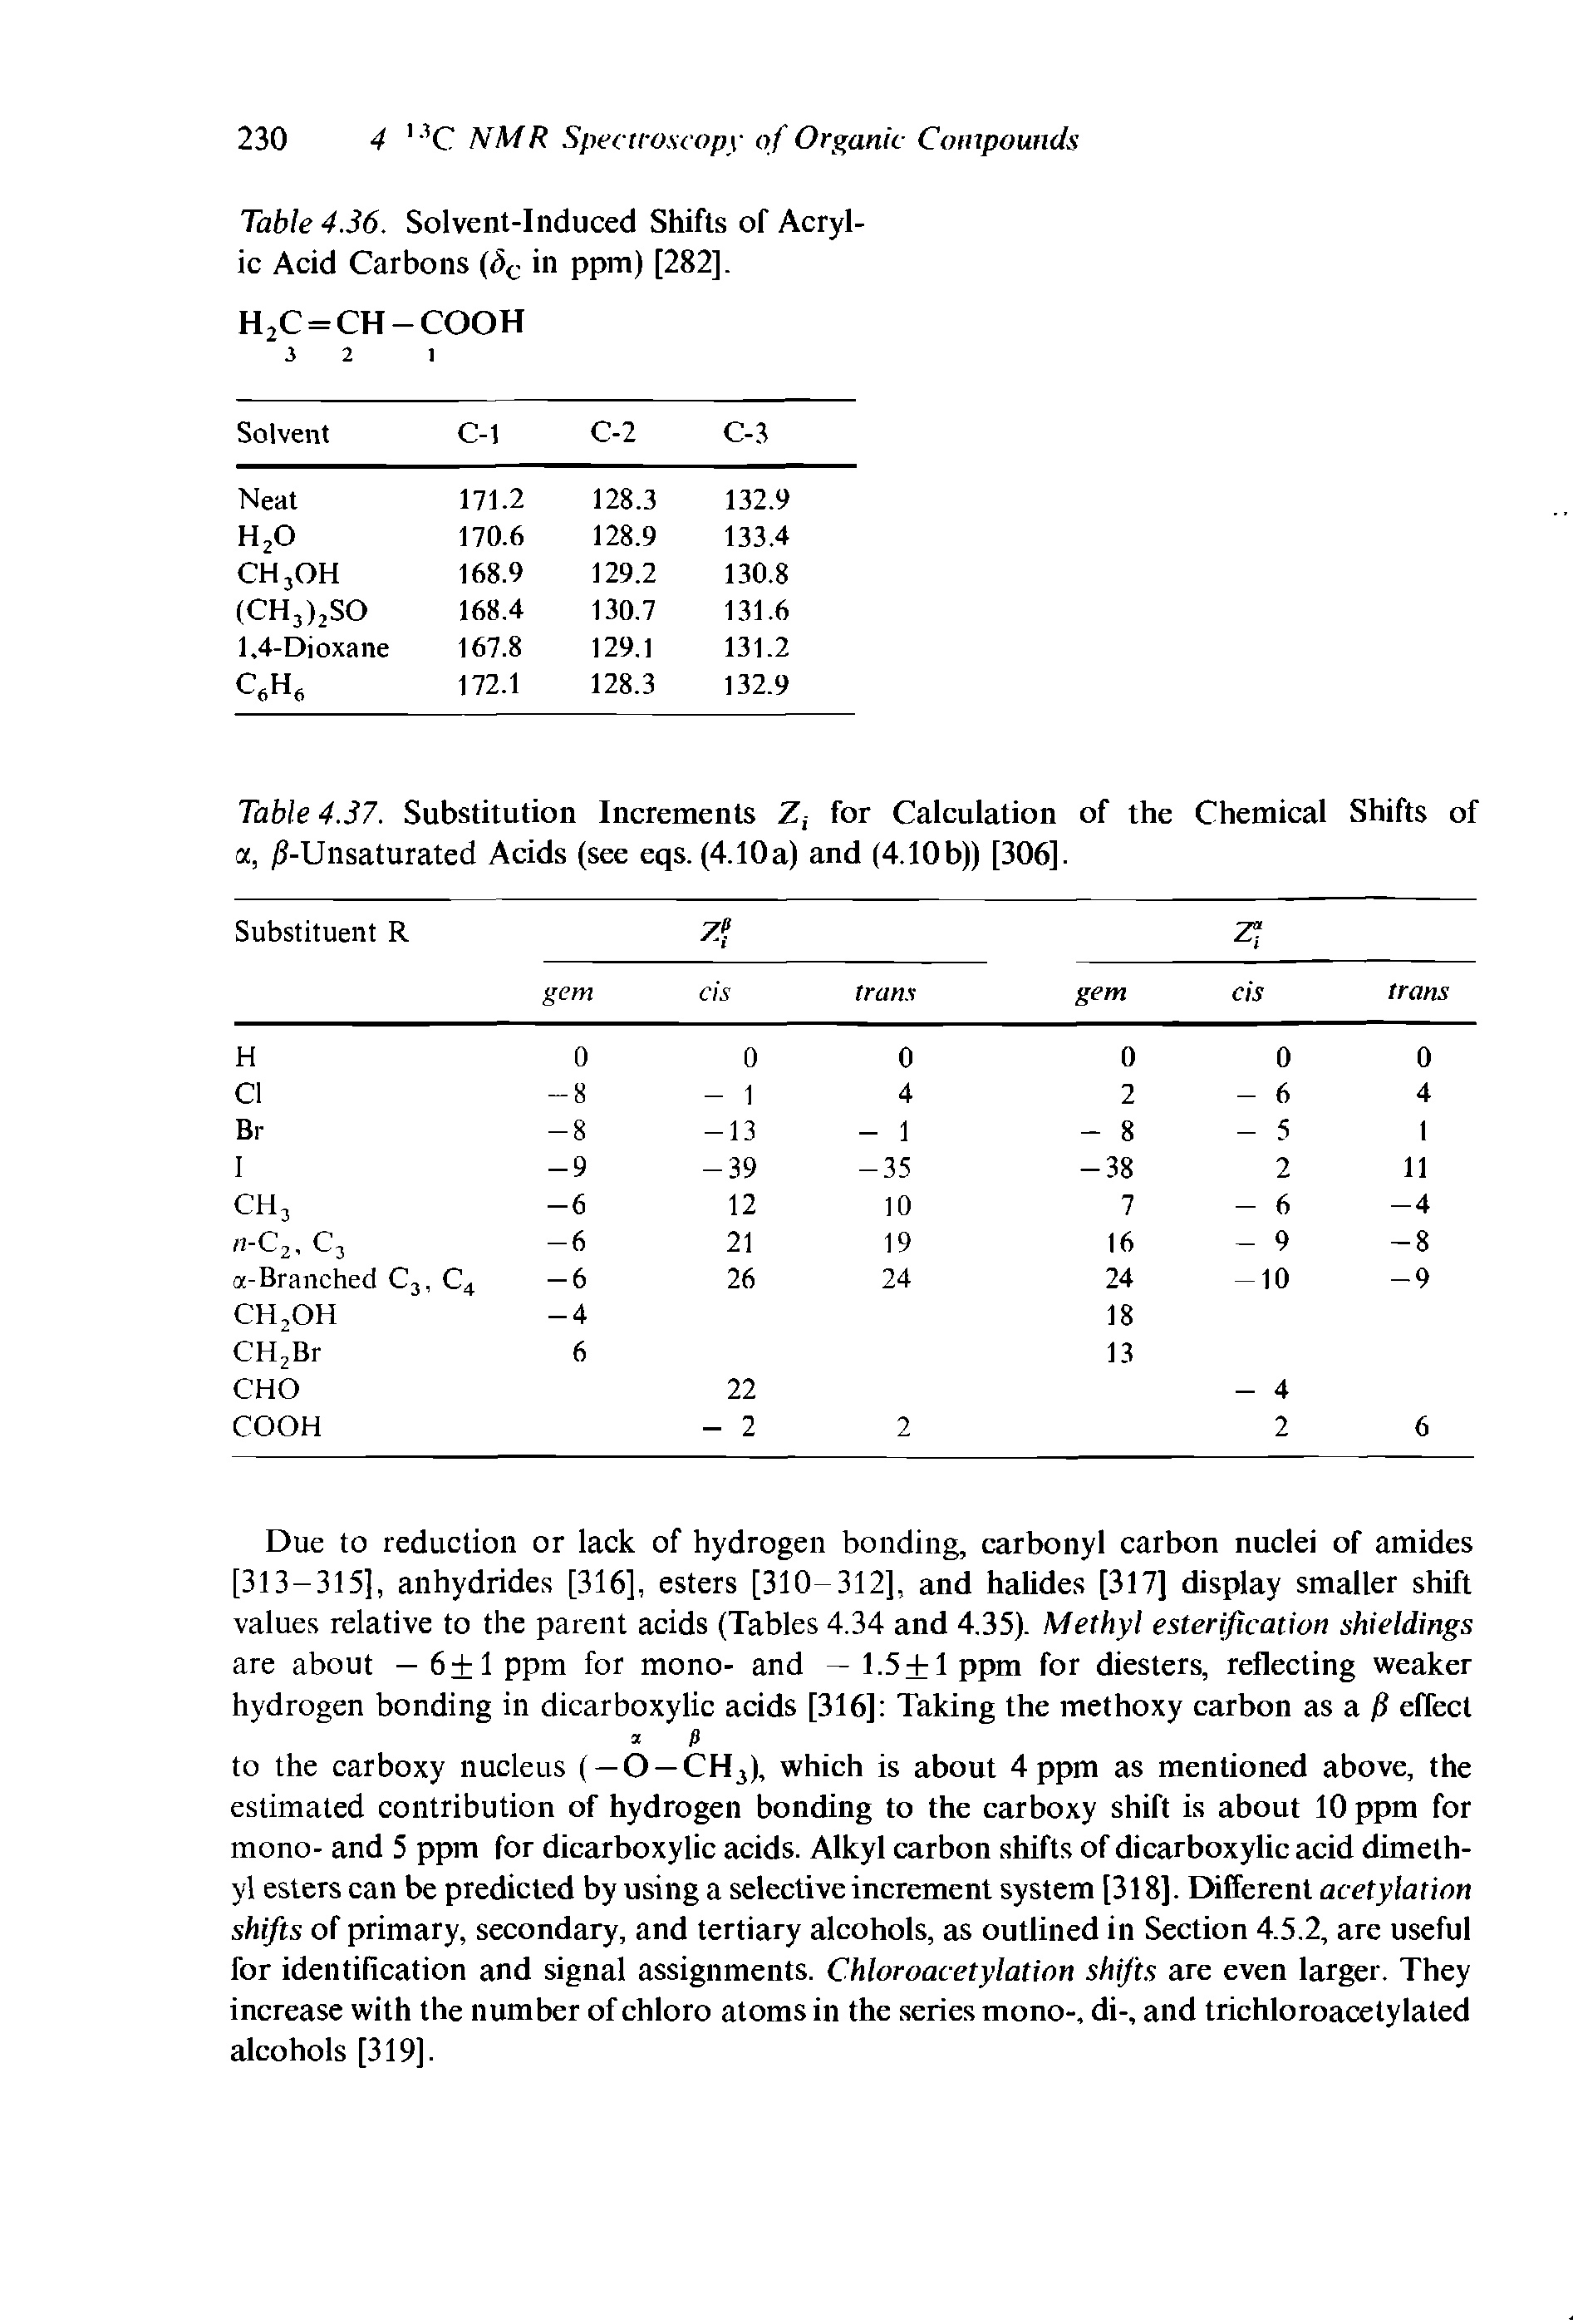 Table 4.36. Solvent-Induced Shifts of Acrylic Acid Carbons (<5C in ppm) [282].